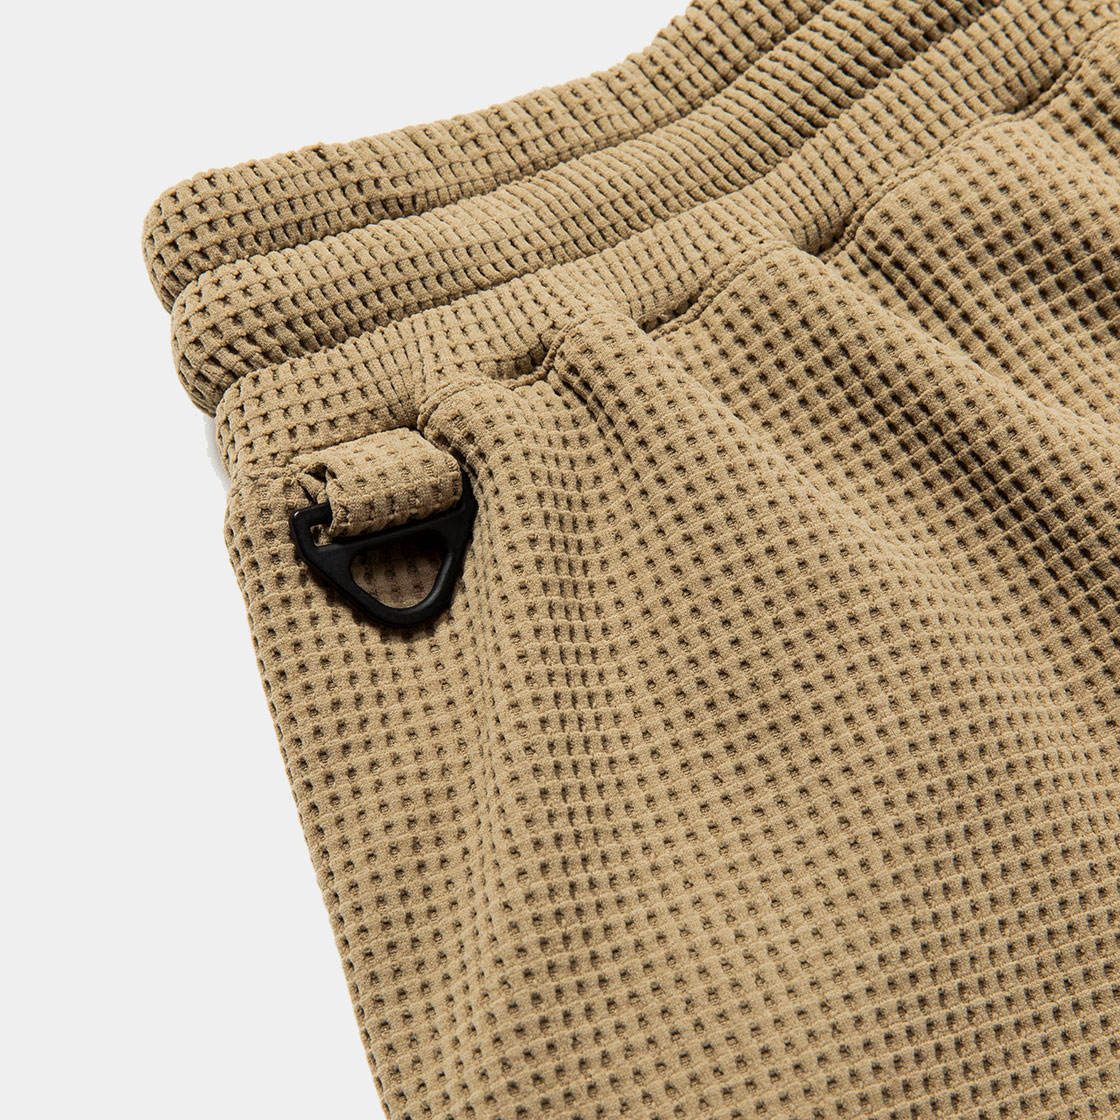 SOLOTEX® Easy Shorts / Beige